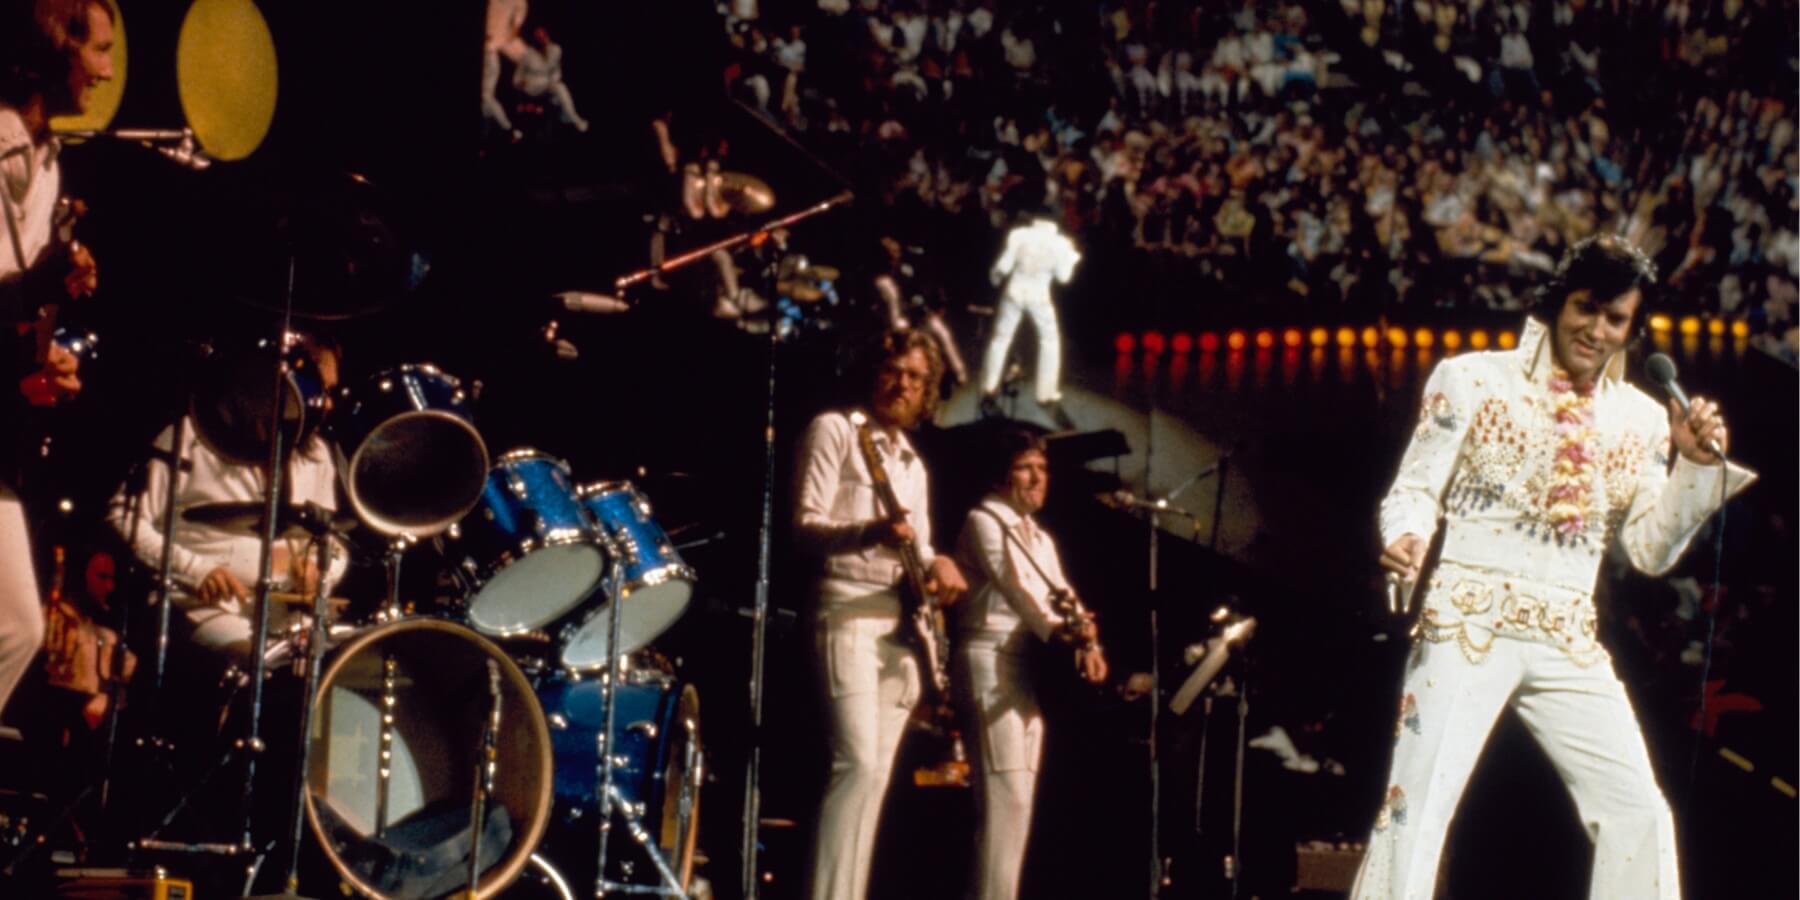 Elvis Presley and the TCB band photographed in 1973.